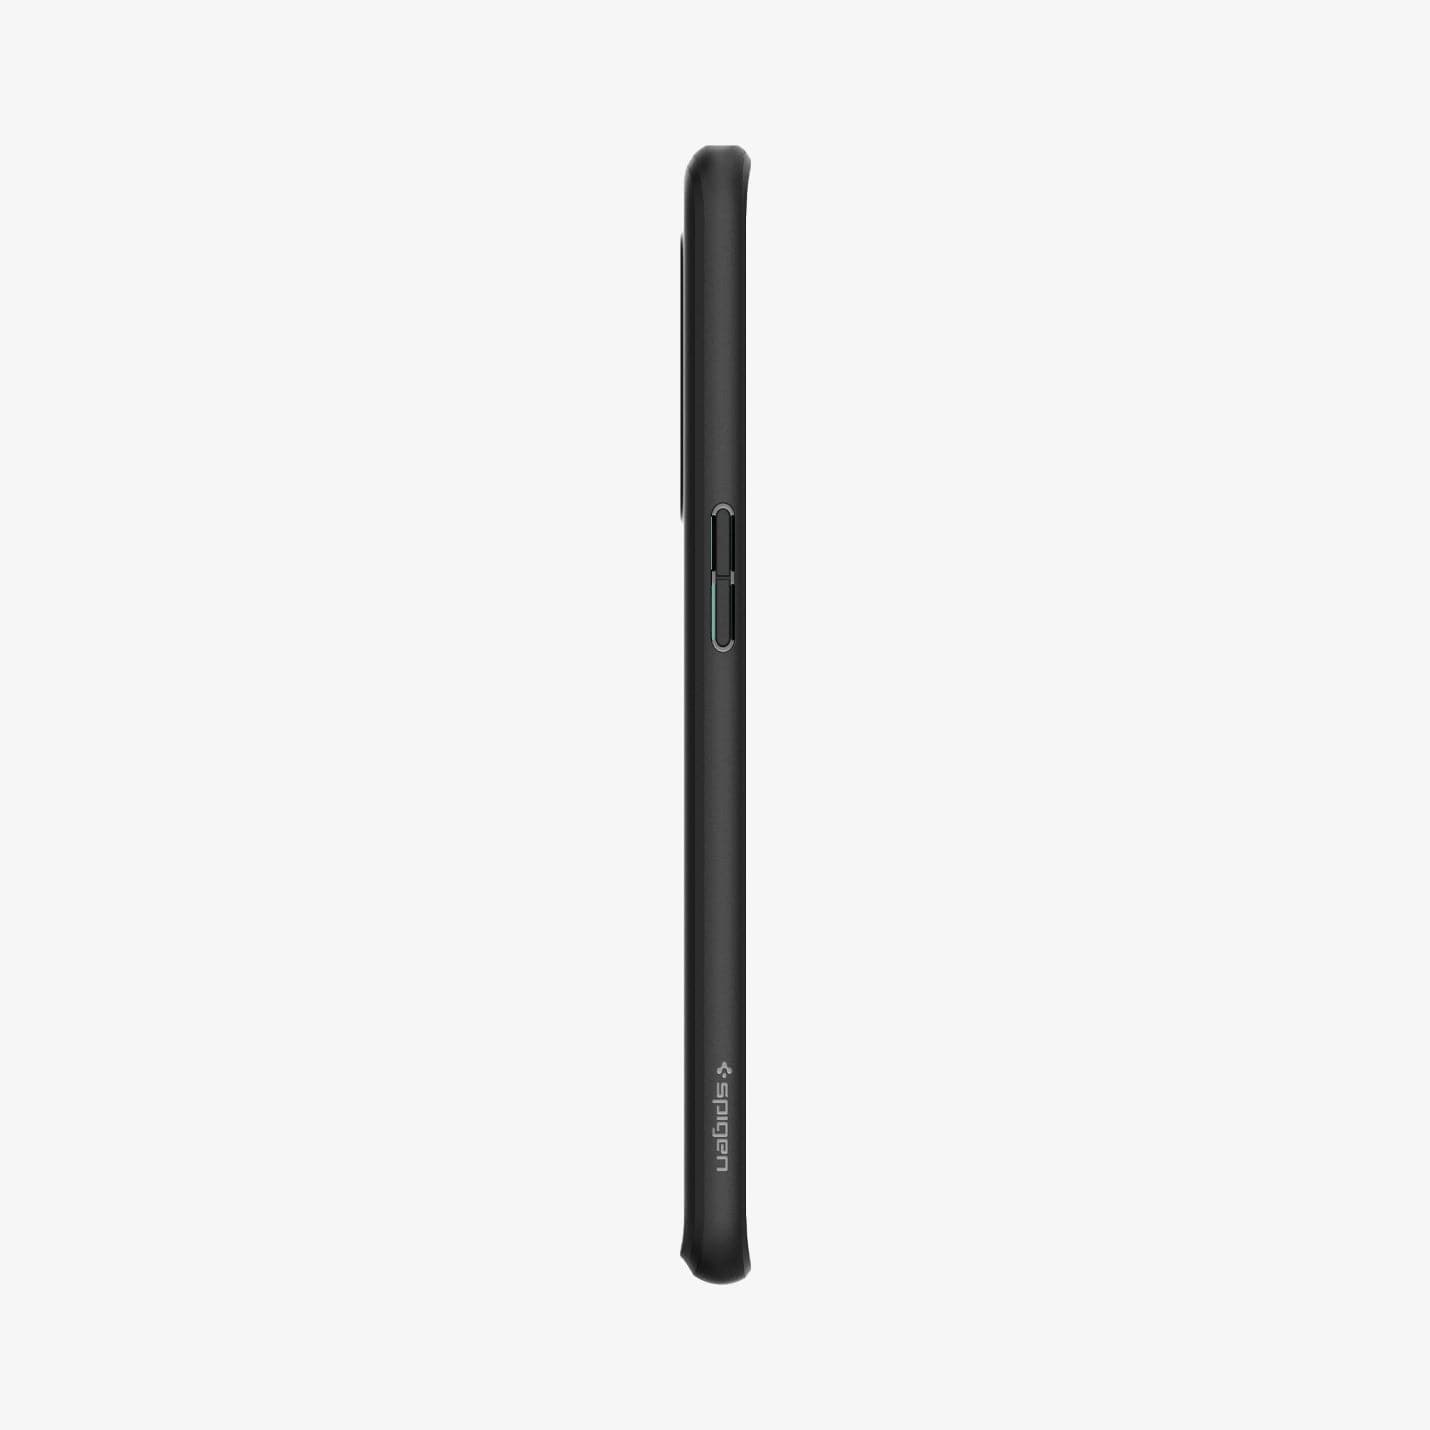 ACS04429 - OnePlus 10 Pro Ultra Hybrid Case in Black showing the side